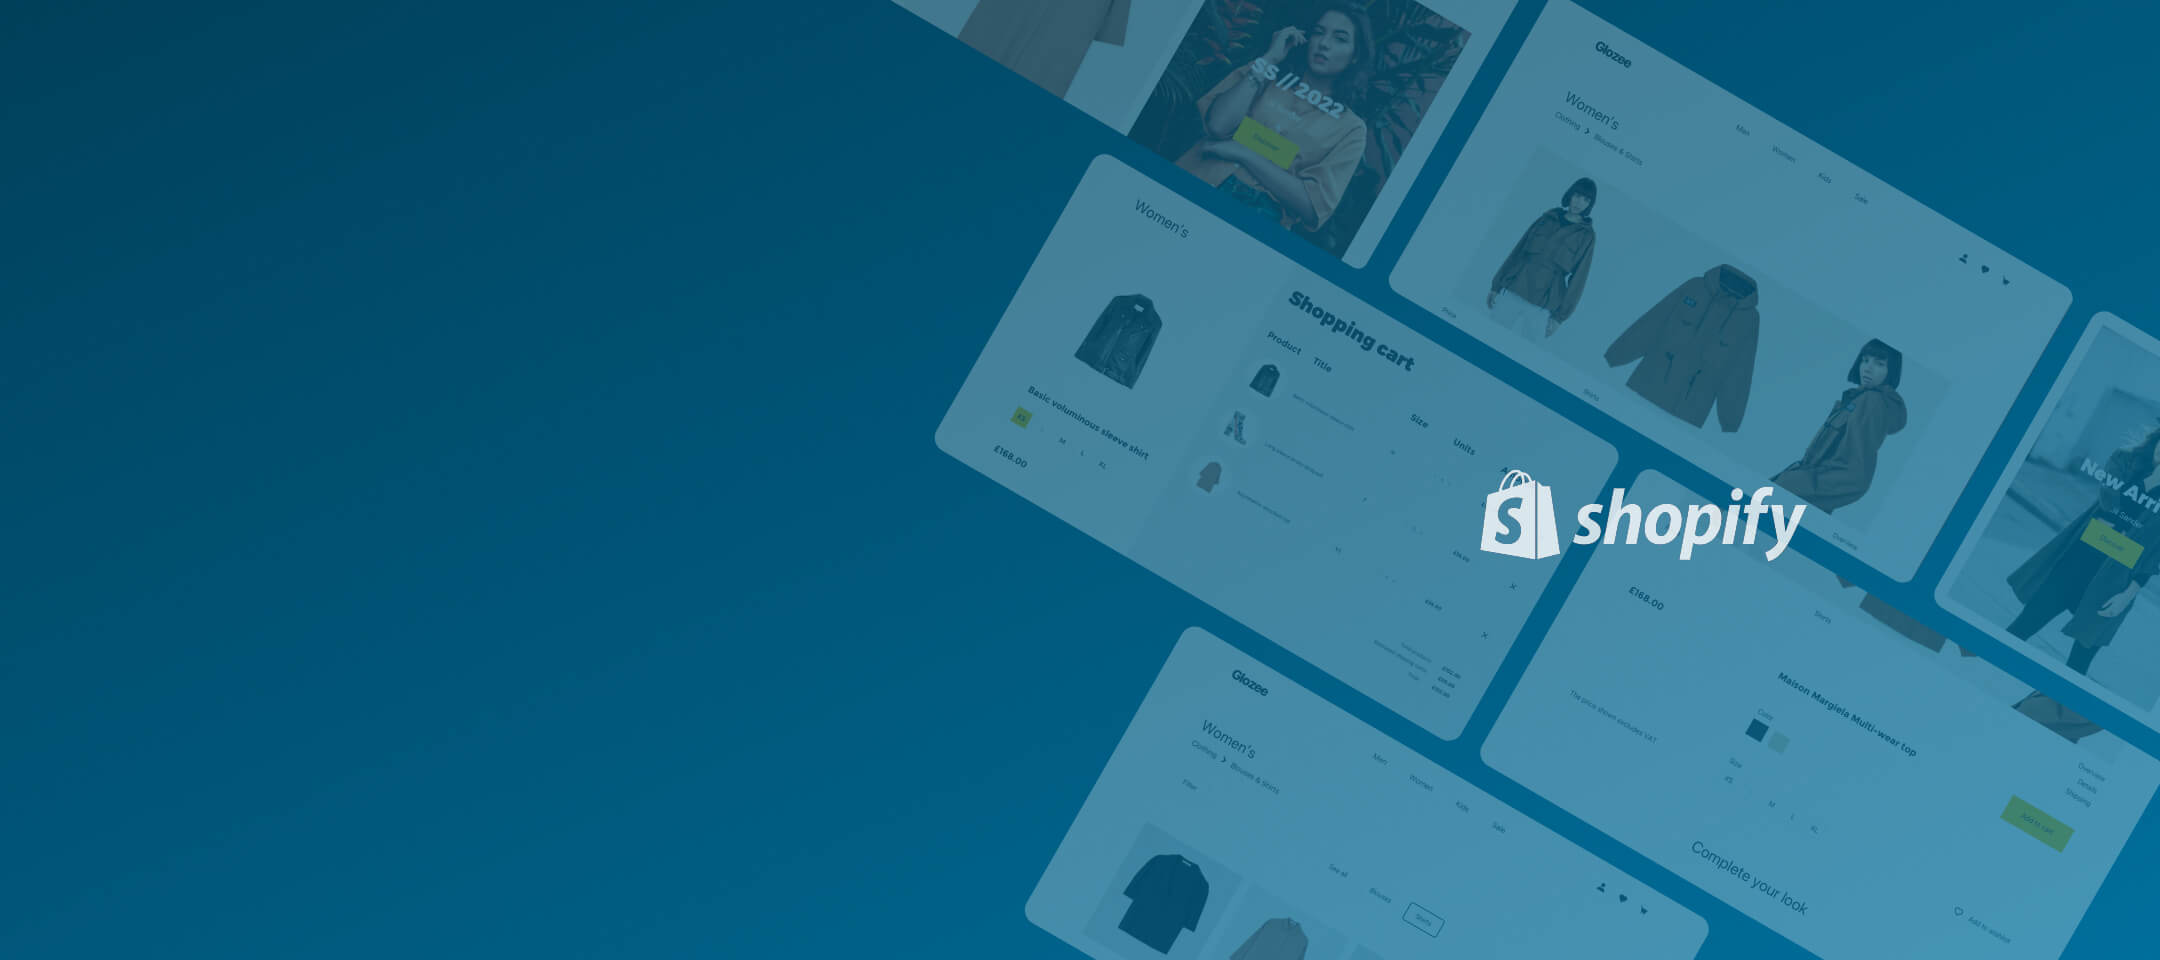 shopify development agency work by ronins